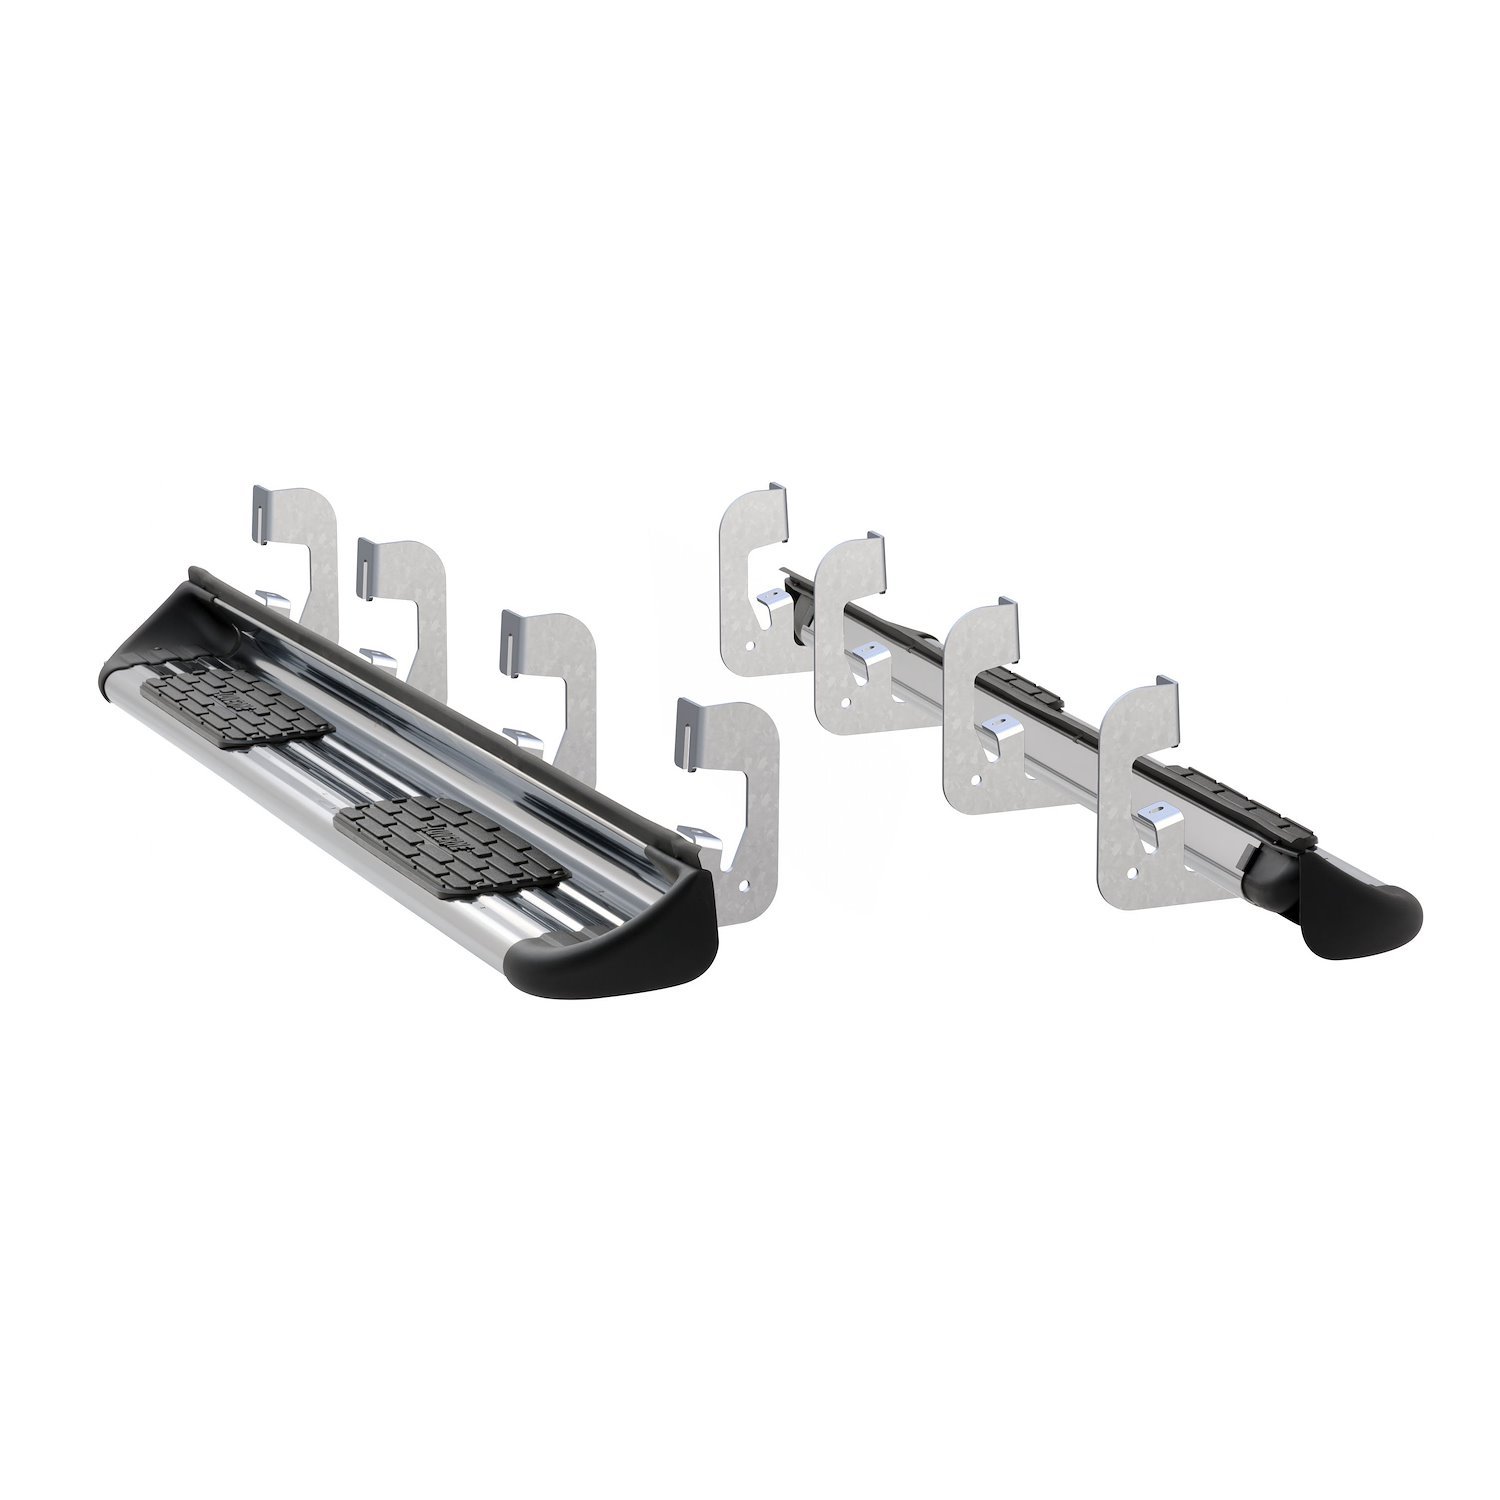 480743-581443 Polished Stainless Steel Side Entry Steps Fits Select Chevy Silverado, GMC Sierra Crew Cab